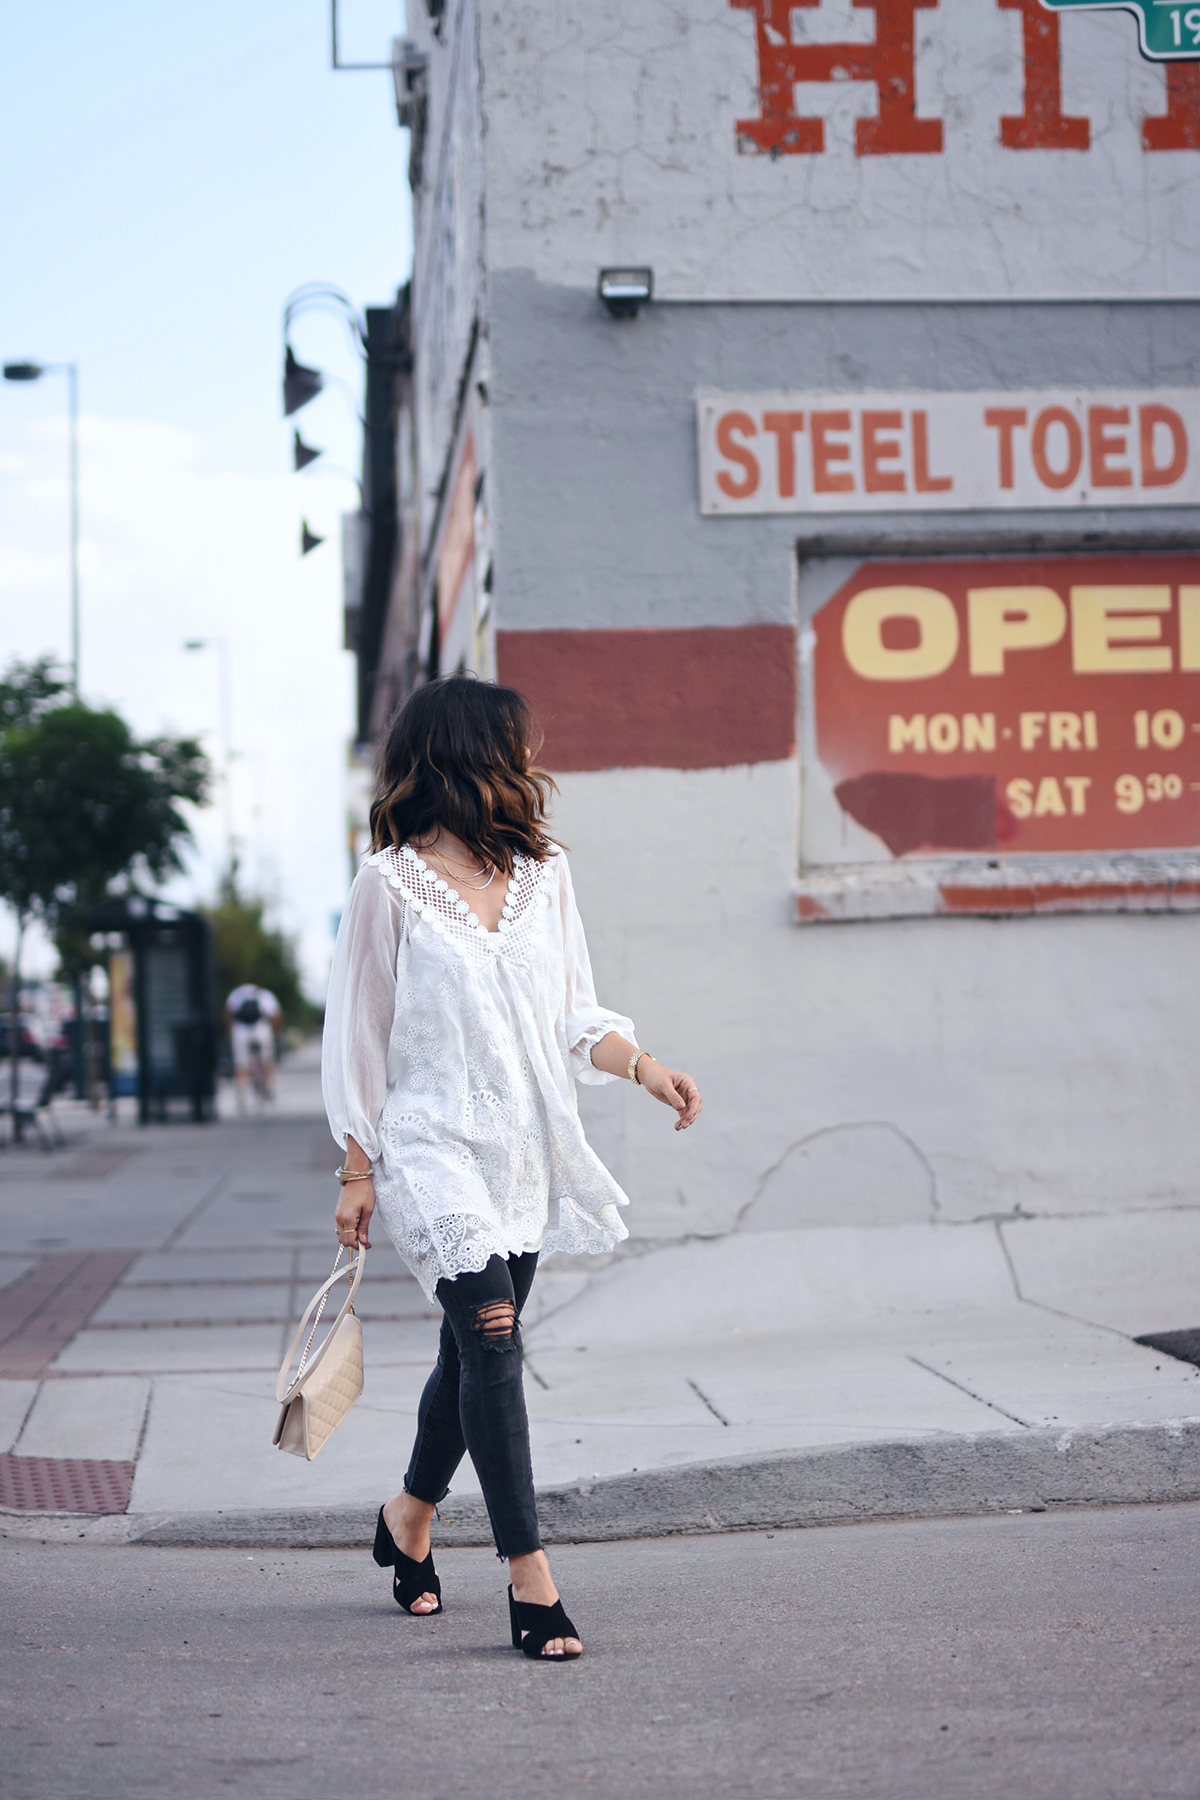 Carolina Hellal of Chic Talk wearing a Chicwish white tunic, Charming Charlie clutch, Madewell jeans and criss cross mules